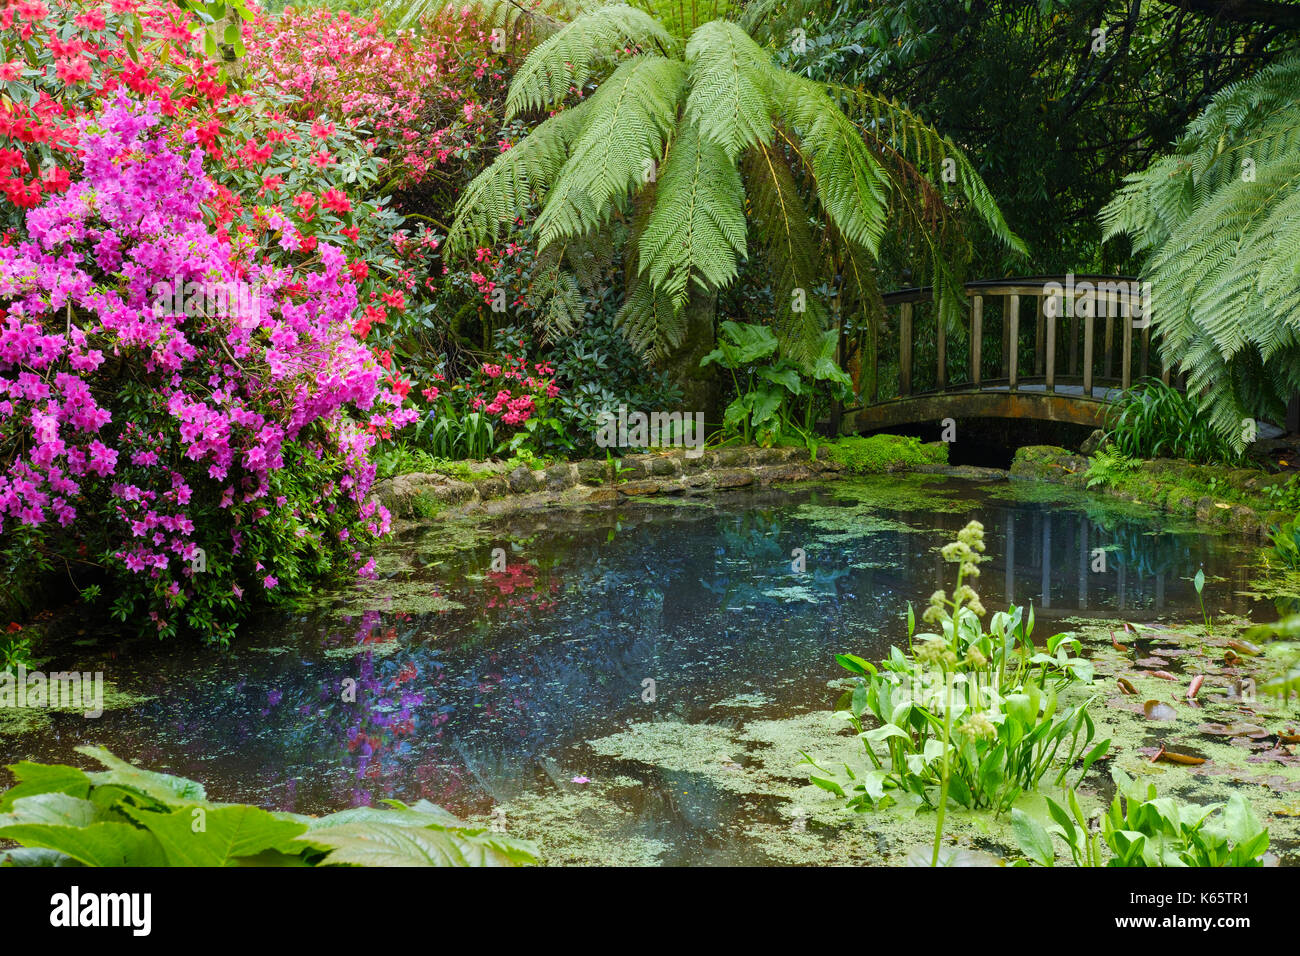 Pond with flowering rhododendrons and tree fern, Trengwainton Garden, near Penzance, Cornwall, England, Great Britain Stock Photo